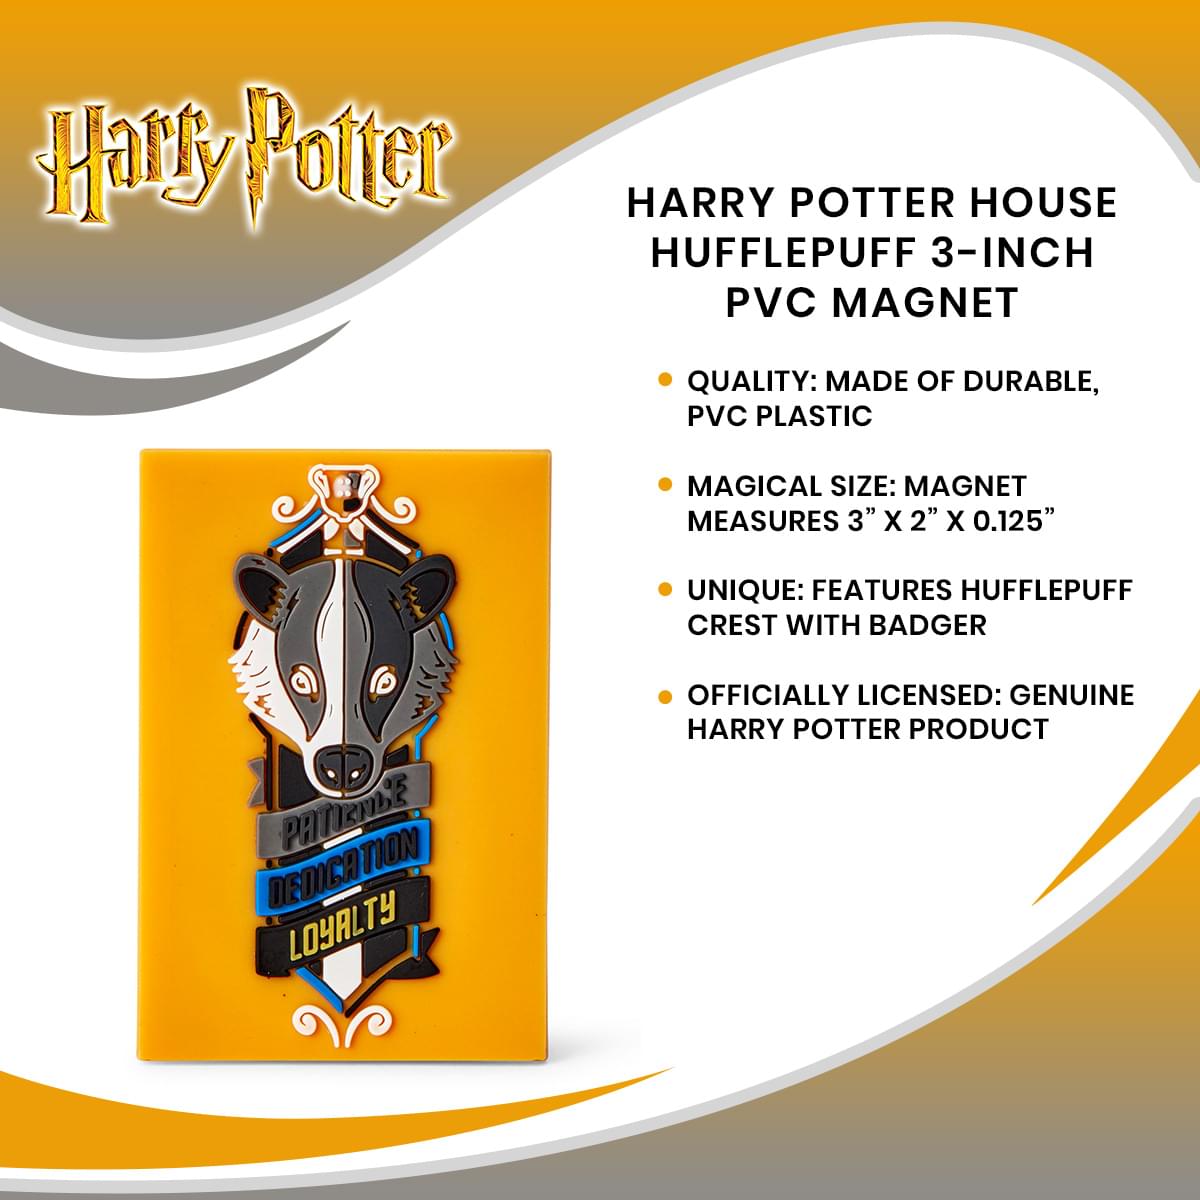 Harry Potter House Hufflepuff 3-Inch PVC Magnet